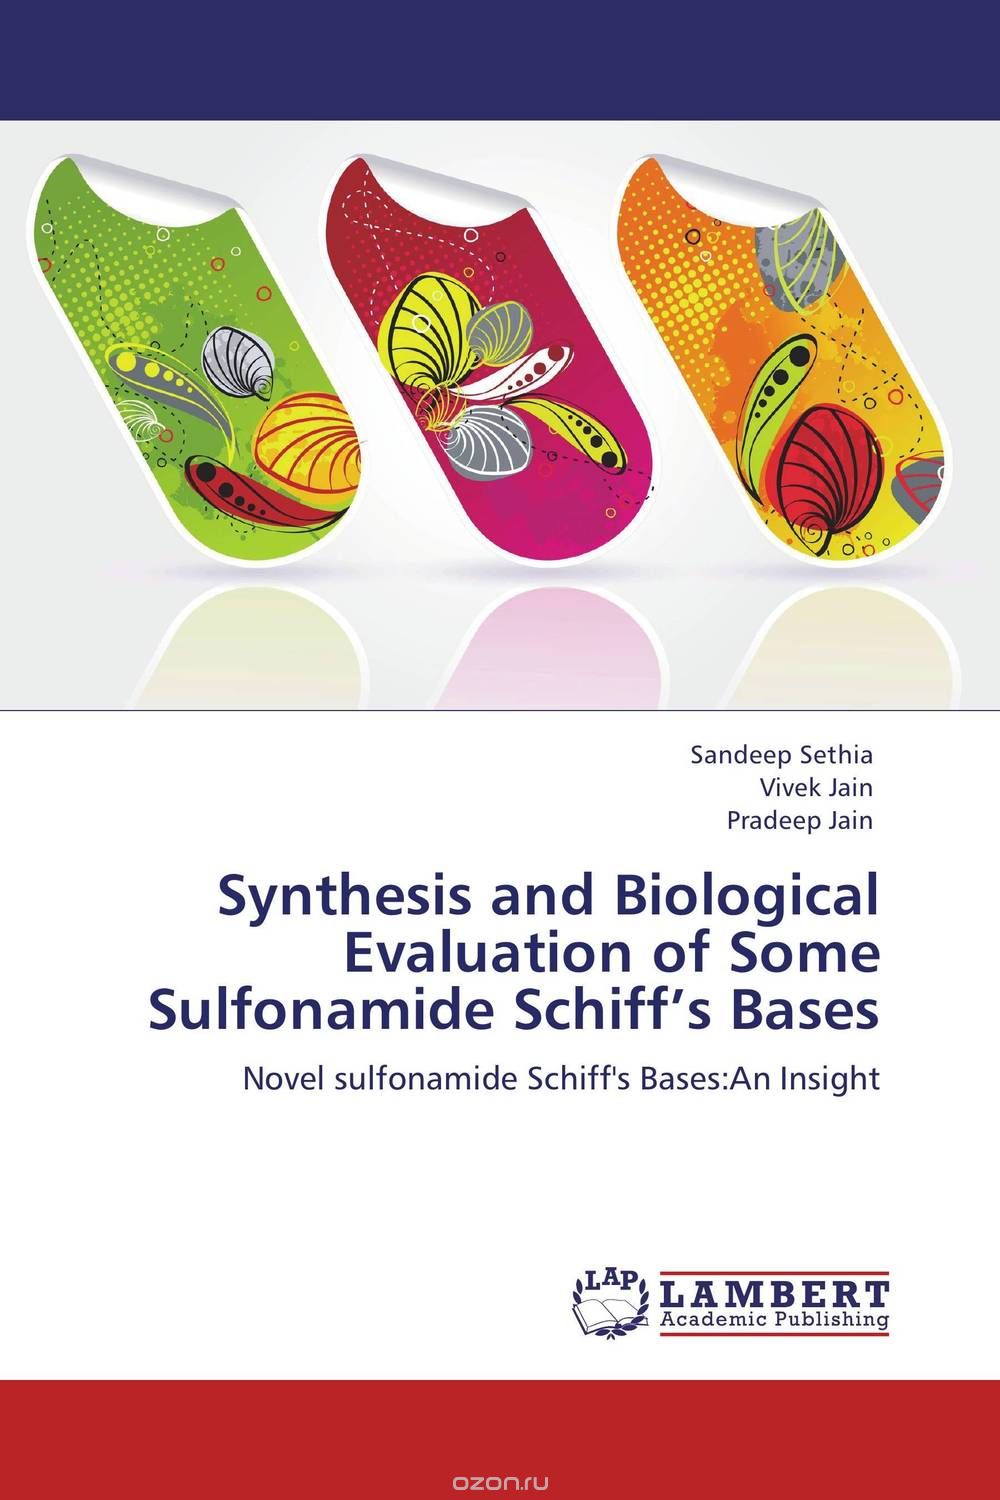 Скачать книгу "Synthesis and Biological Evaluation of Some Sulfonamide Schiff’s Bases"